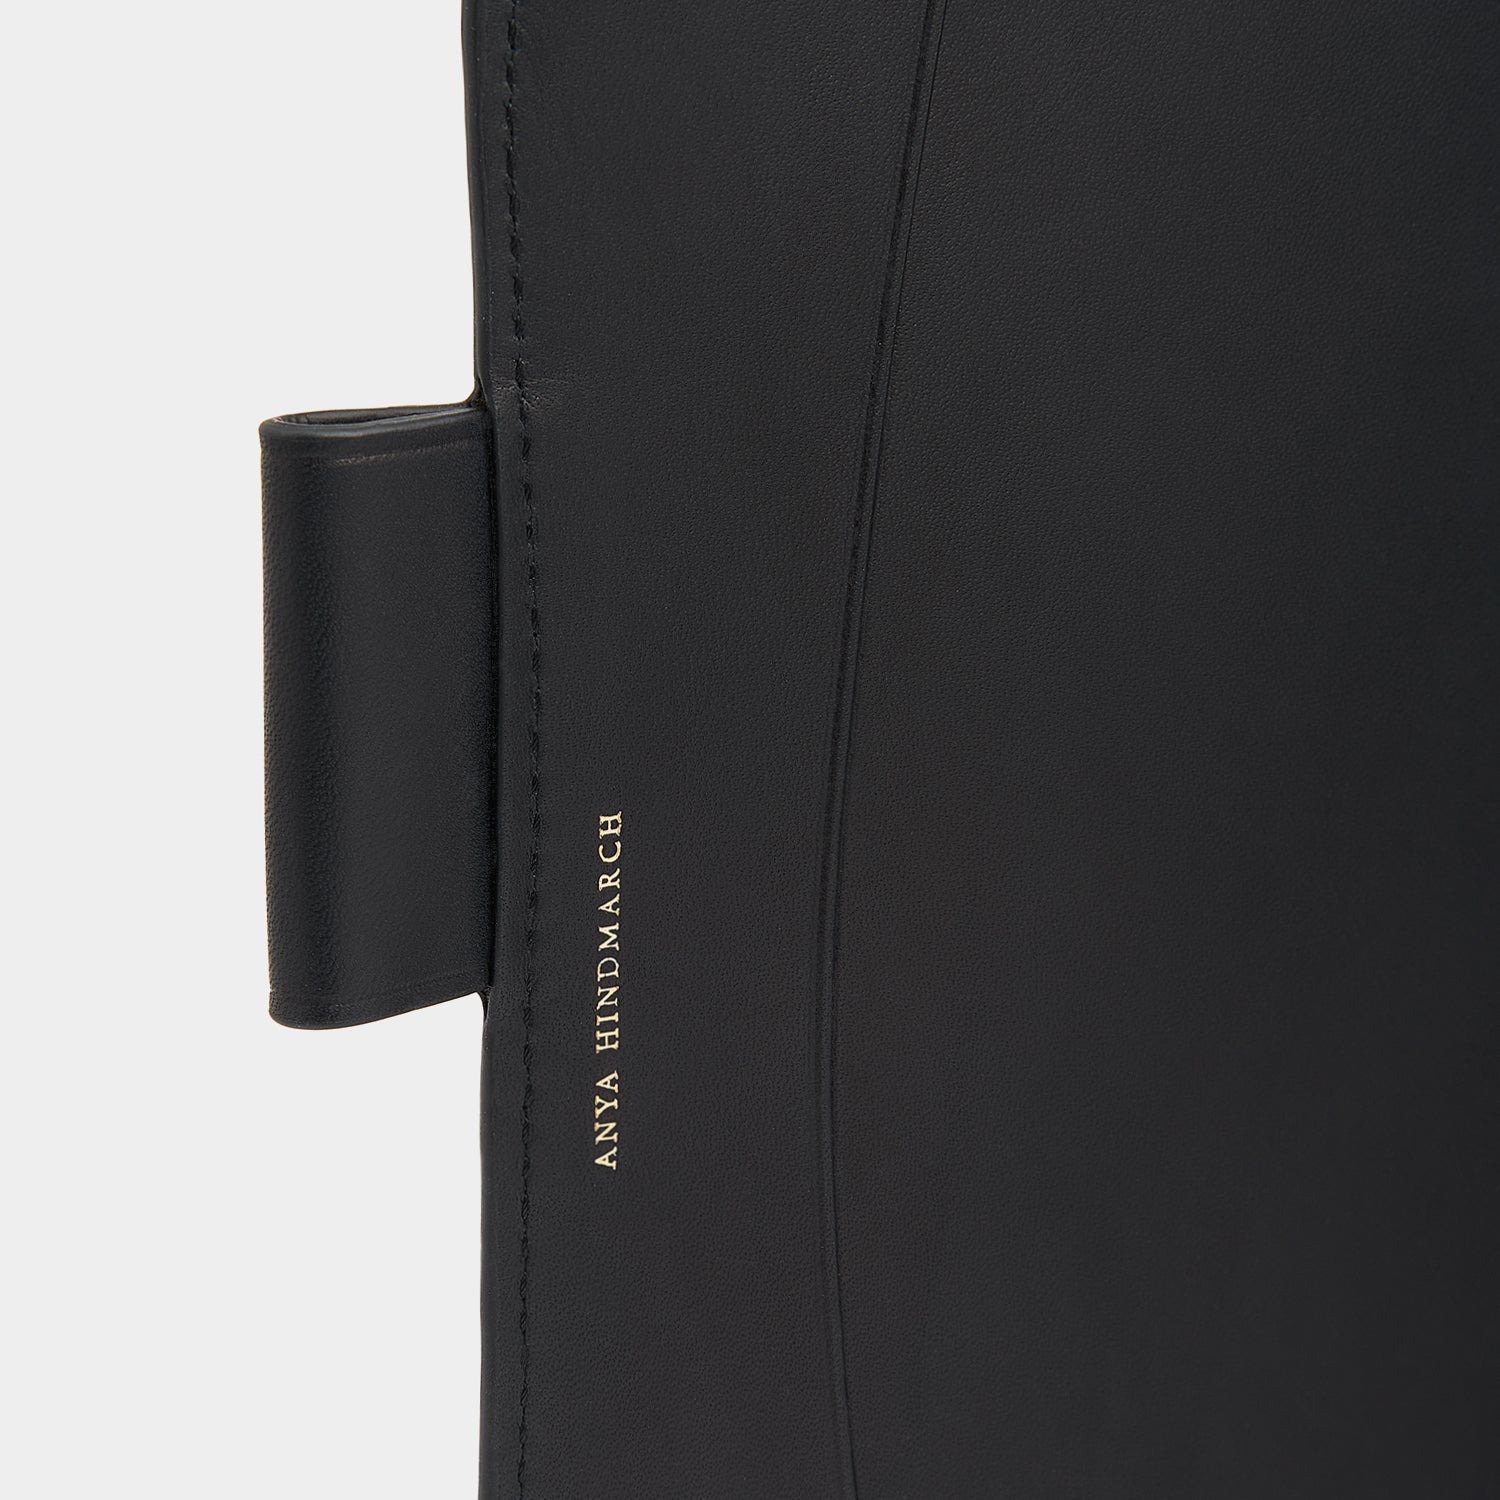 Bespoke A6 Two Way Journal -

                  
                    Butter Leather in Black -
                  

                  Anya Hindmarch EU
